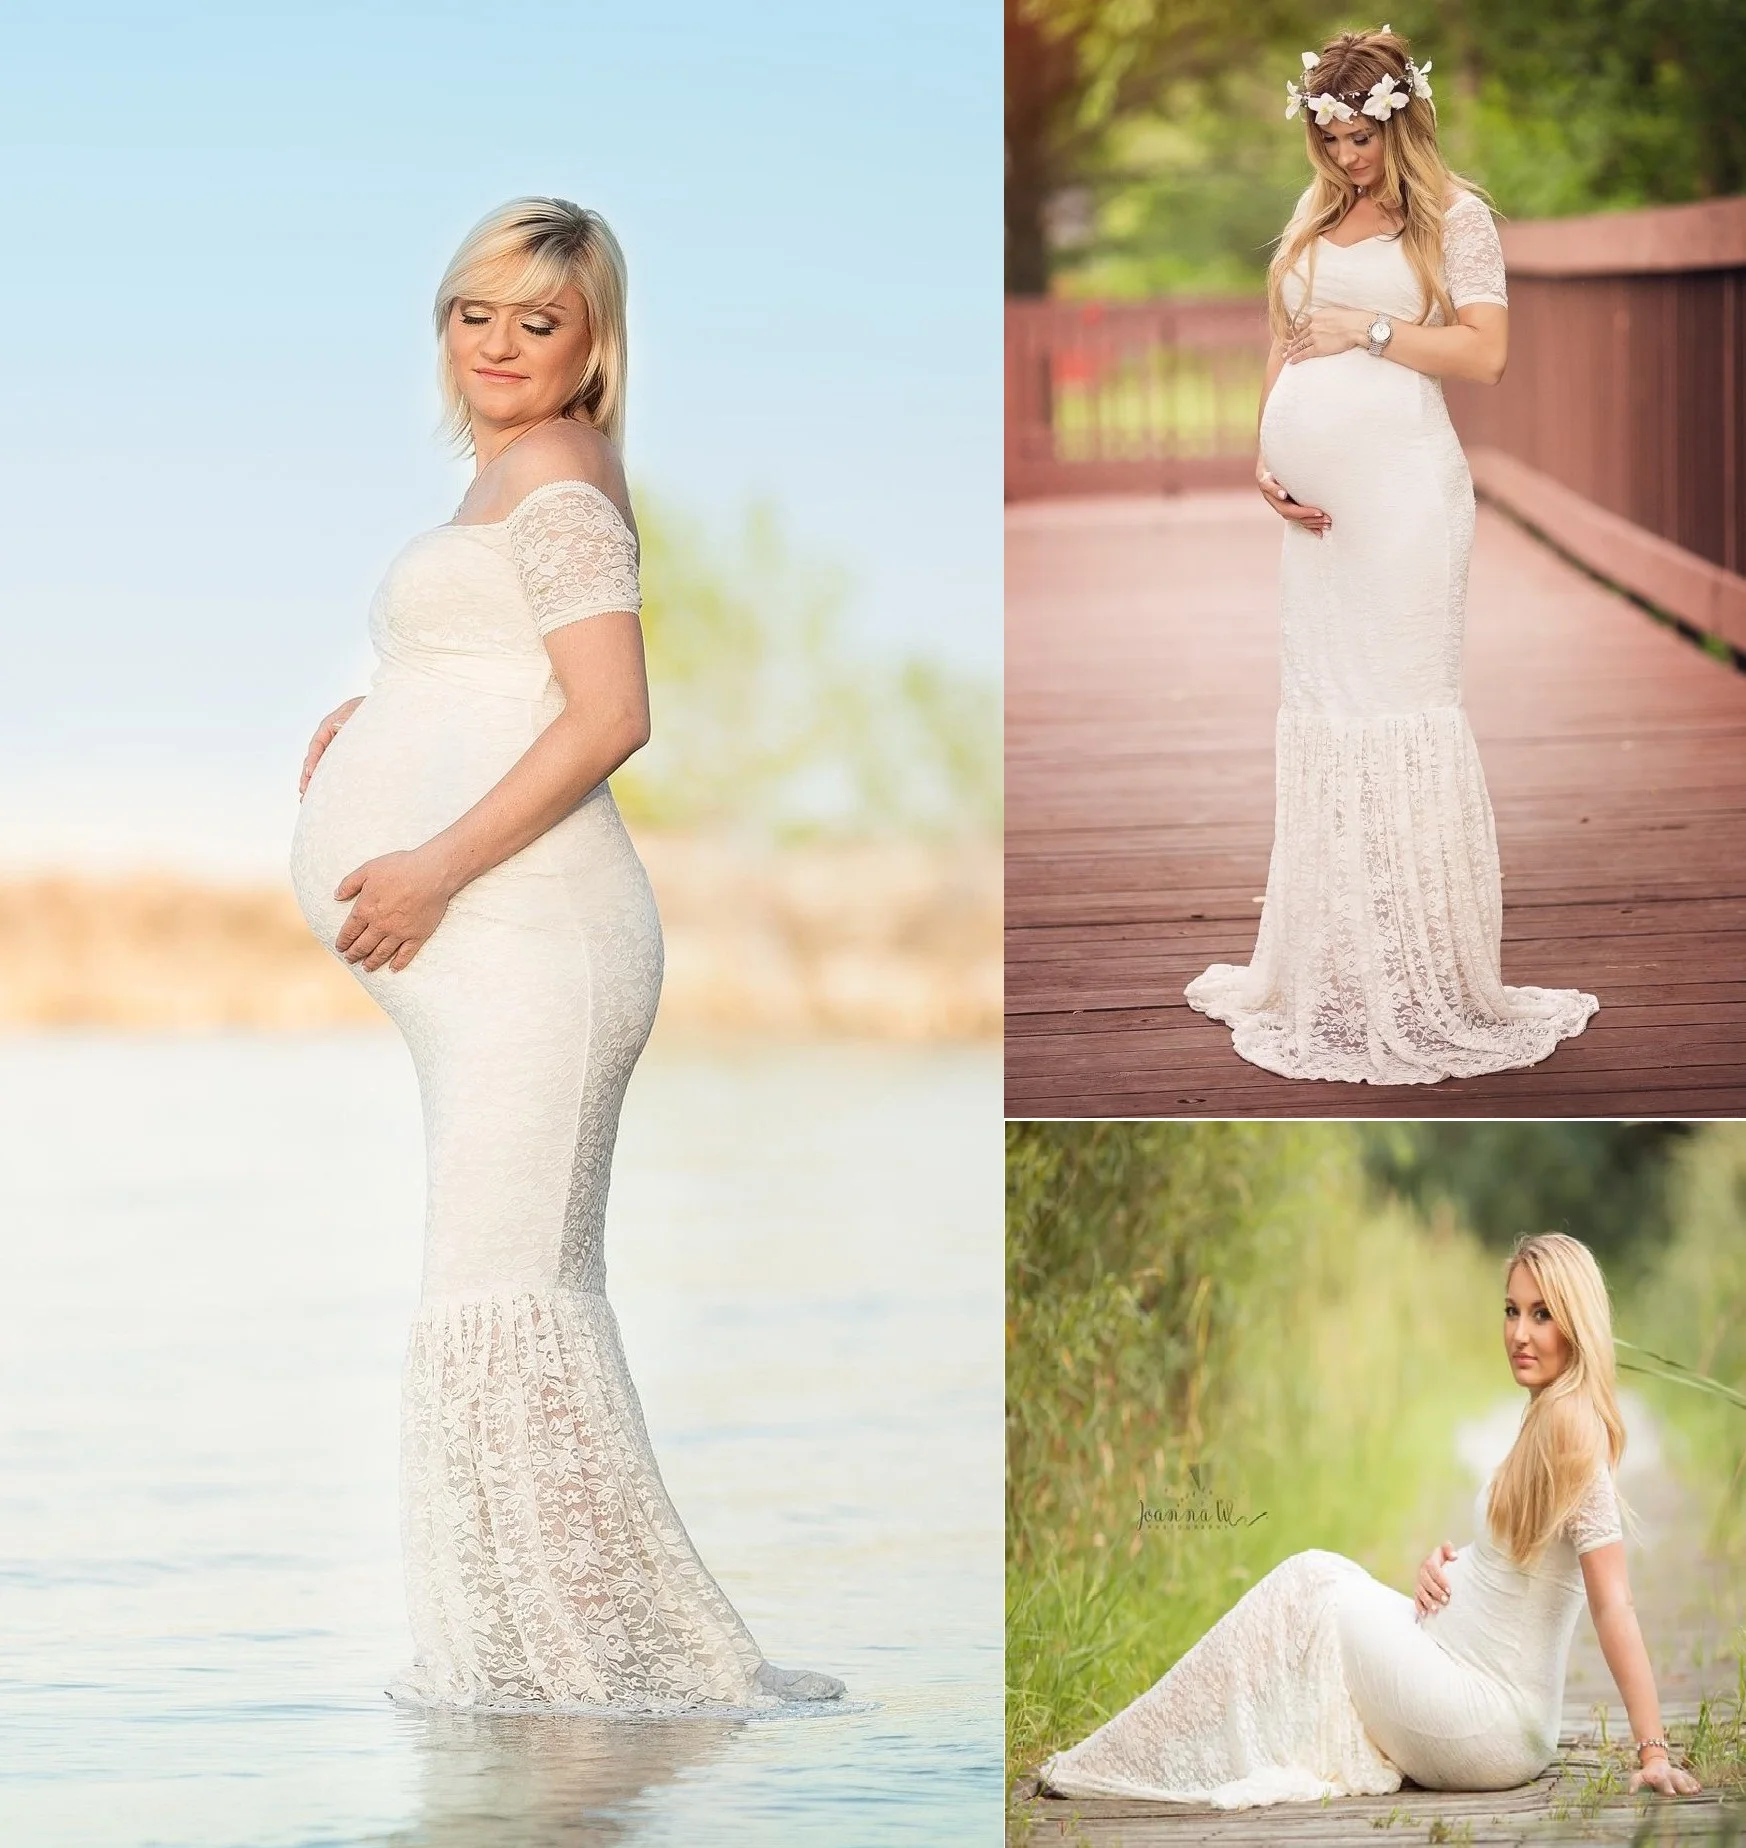 Mermaid Maternity Dresses Lace Photo Shoot Pregnant Women Pregnancy Dress Photography Prop Lady Sexy Maxi Maternity Gown V-Neck enlarge